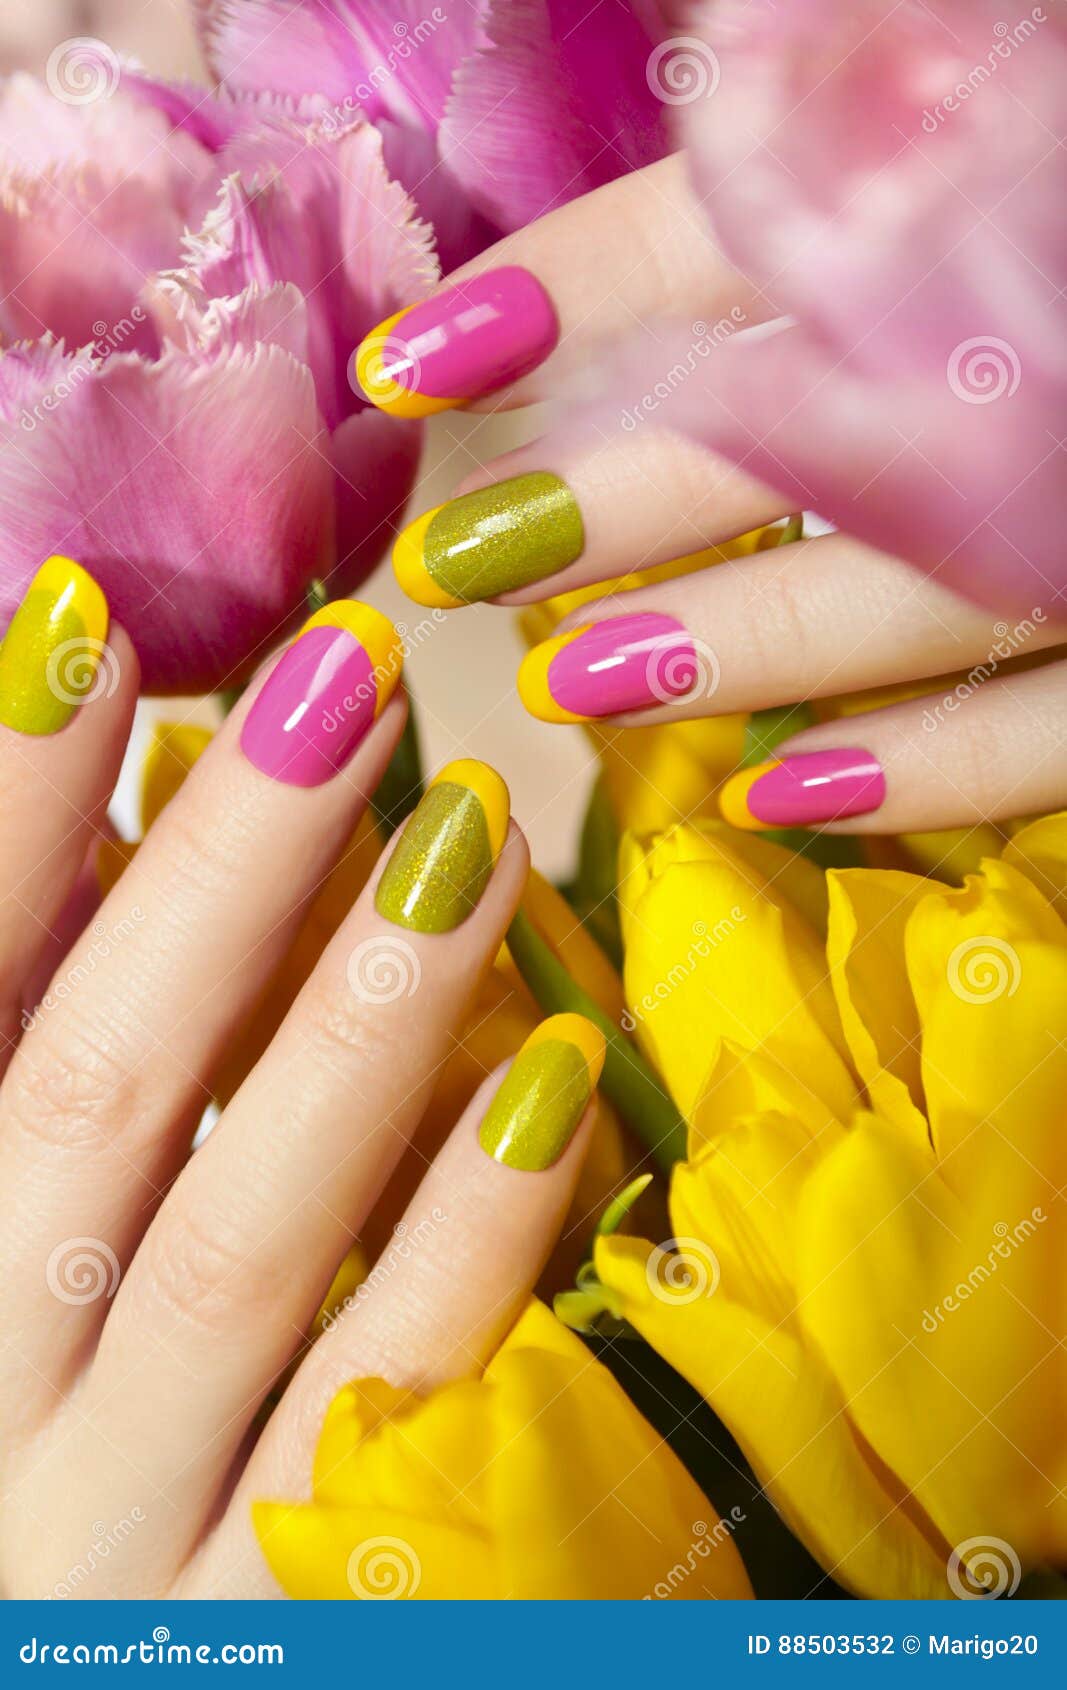 Premium Photo | Yellow and black on nails young lady hands with manicured  nail art design dark yellow color nails0